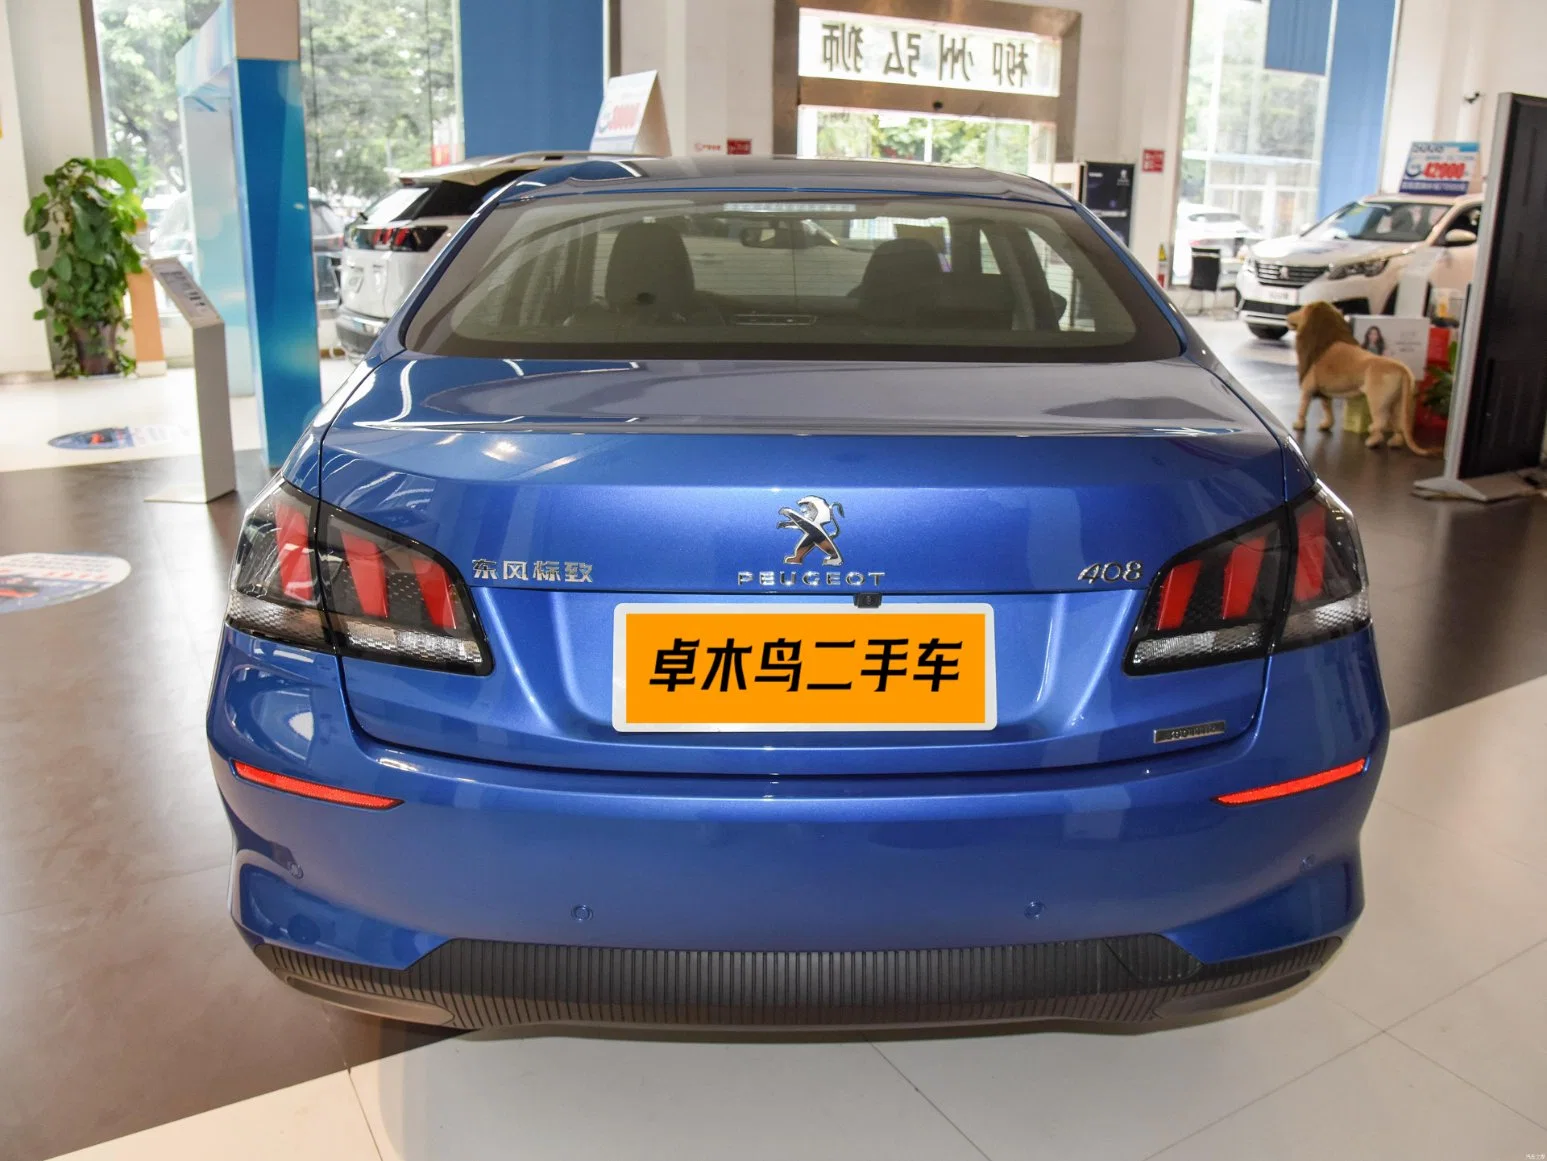 Dongfeng Used-Peugeot 408 Compact Vehicle with 1.6t Maximum 170 Horsepower L4 Automatic Gas Car with 6 Gearbox 5 Seats Petrol Car